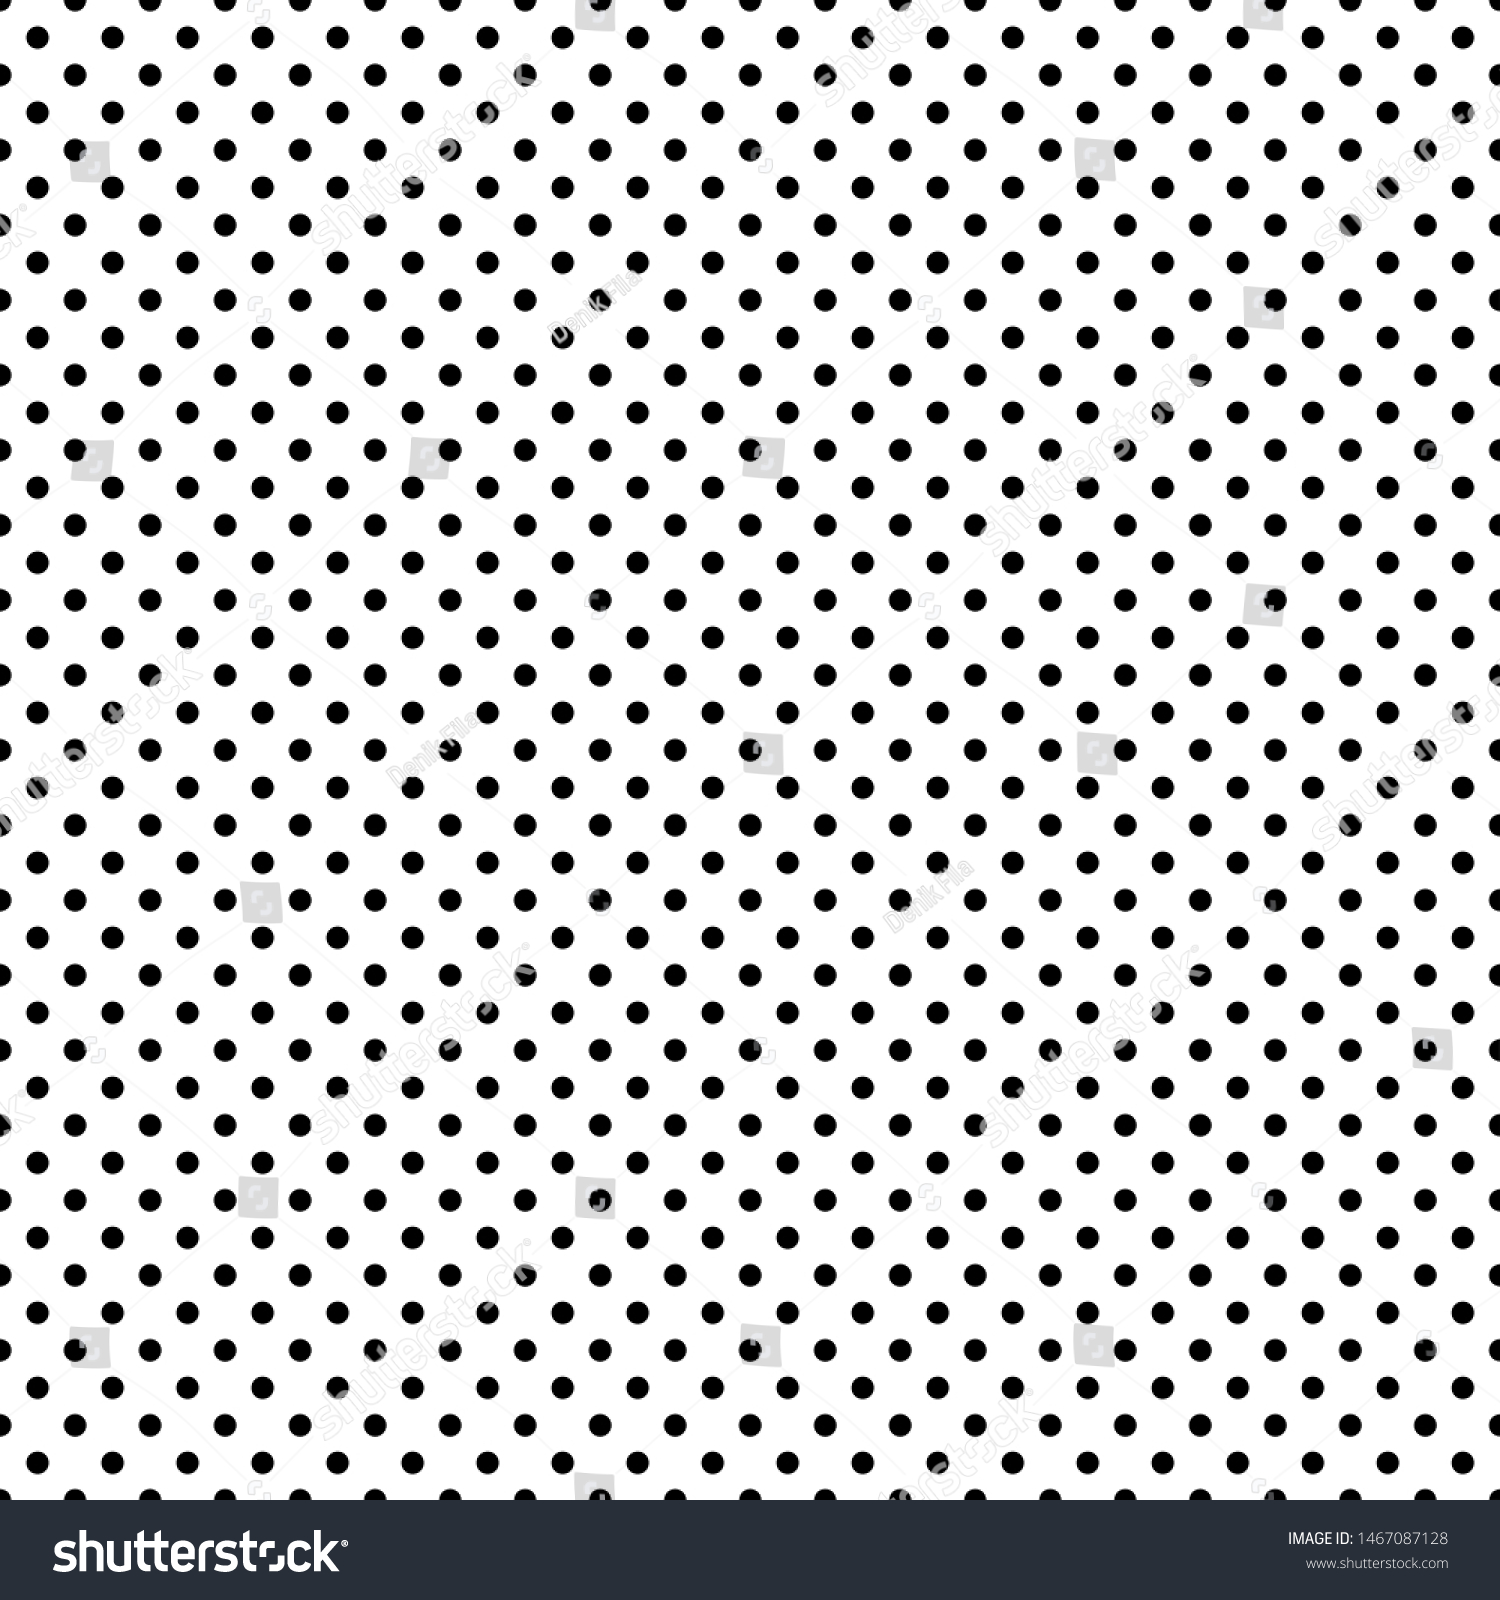 31,644 Pattern png Images, Stock Photos & Vectors | Shutterstock